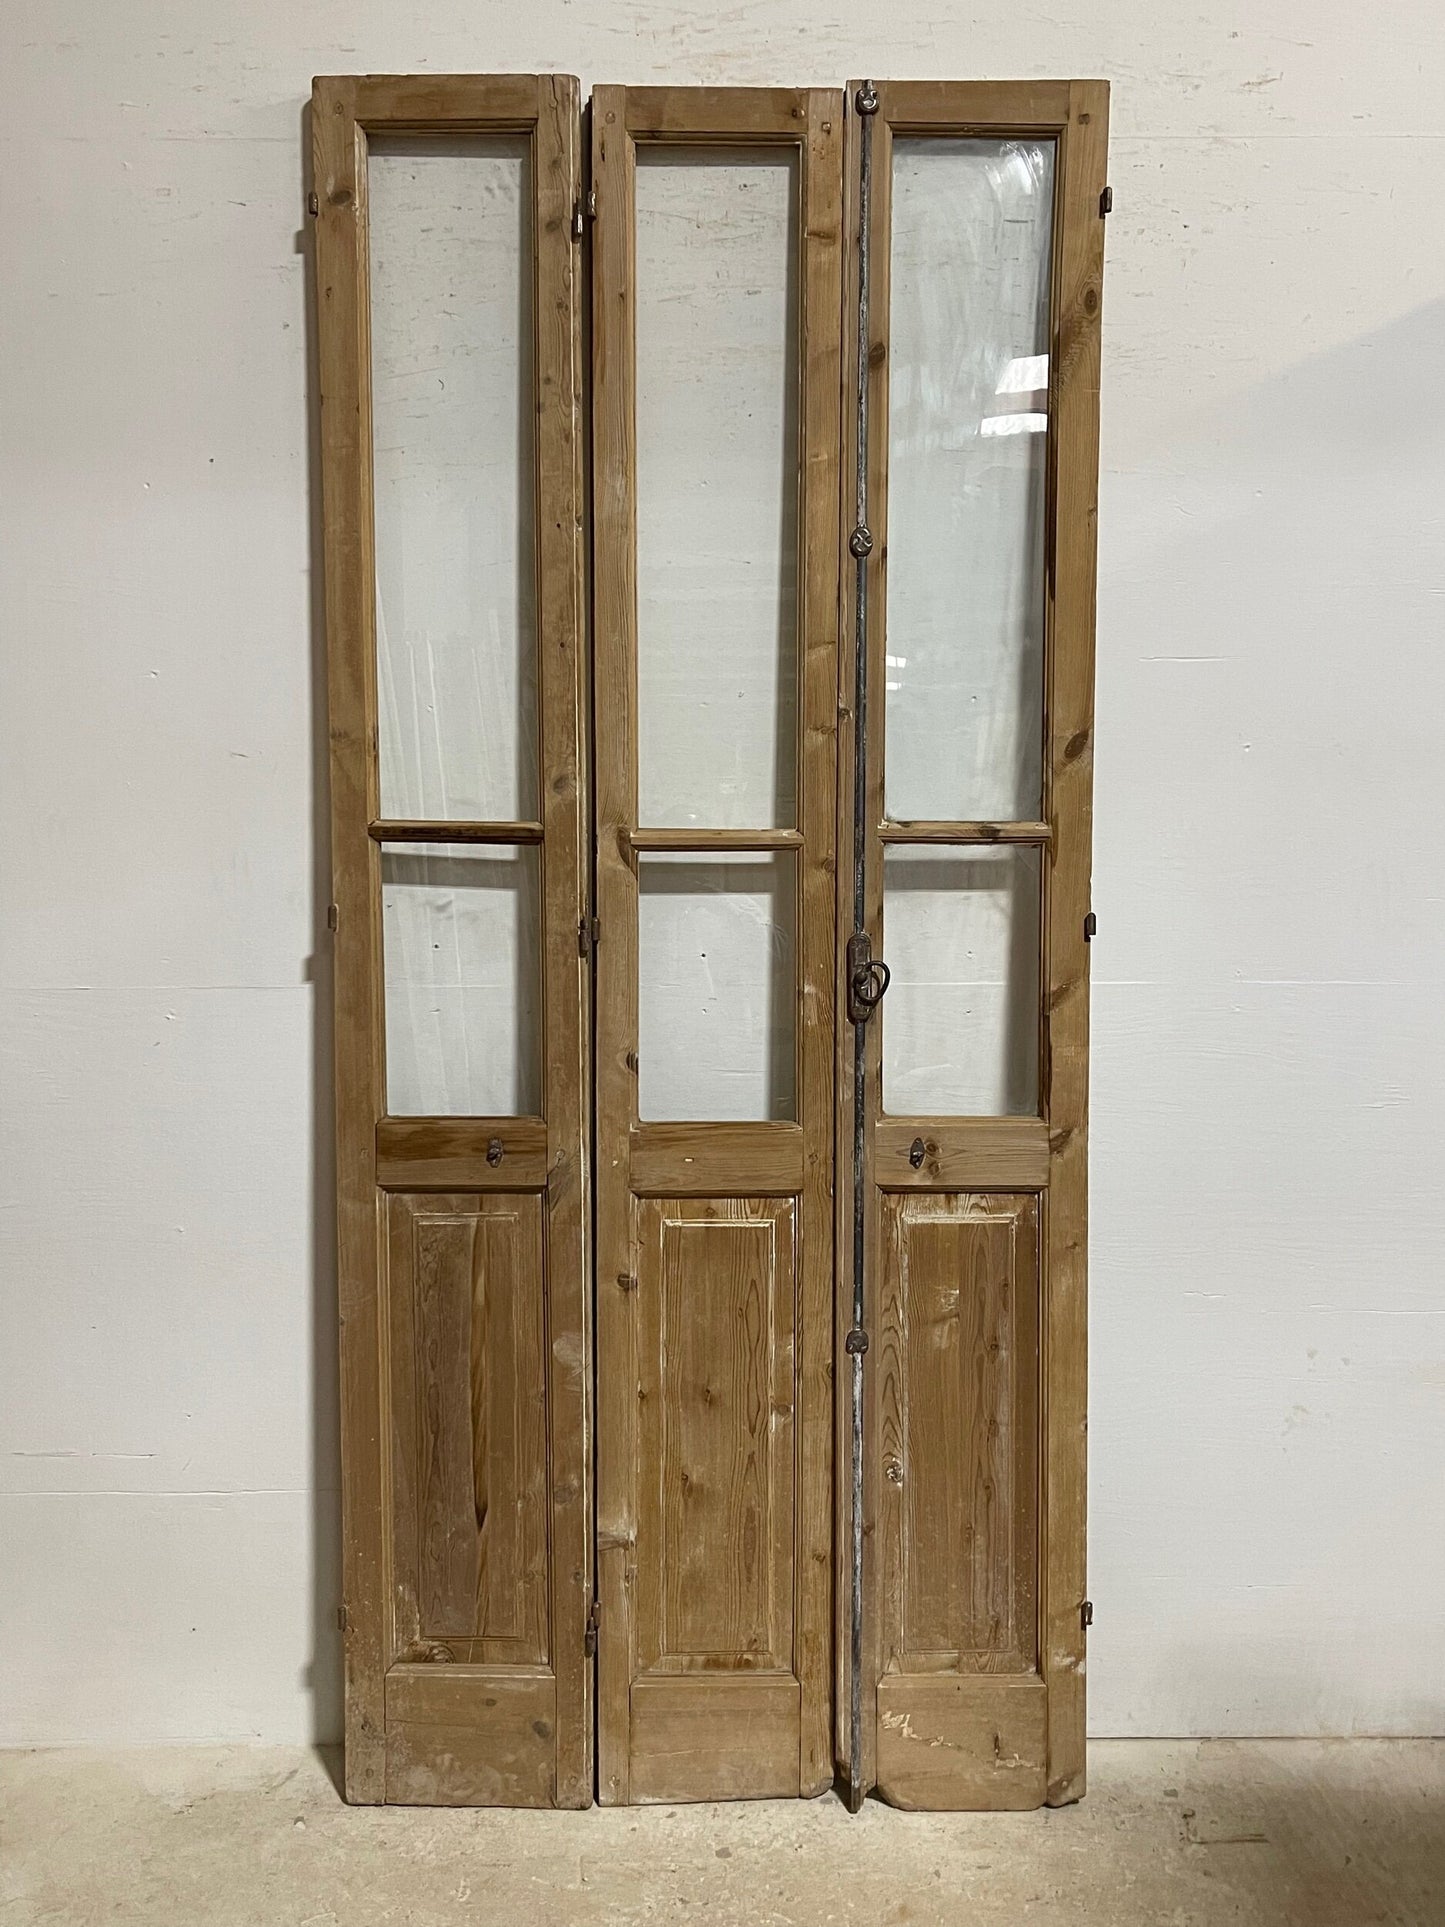 Antique French doors with glass  (98.5x43.25) H0243s